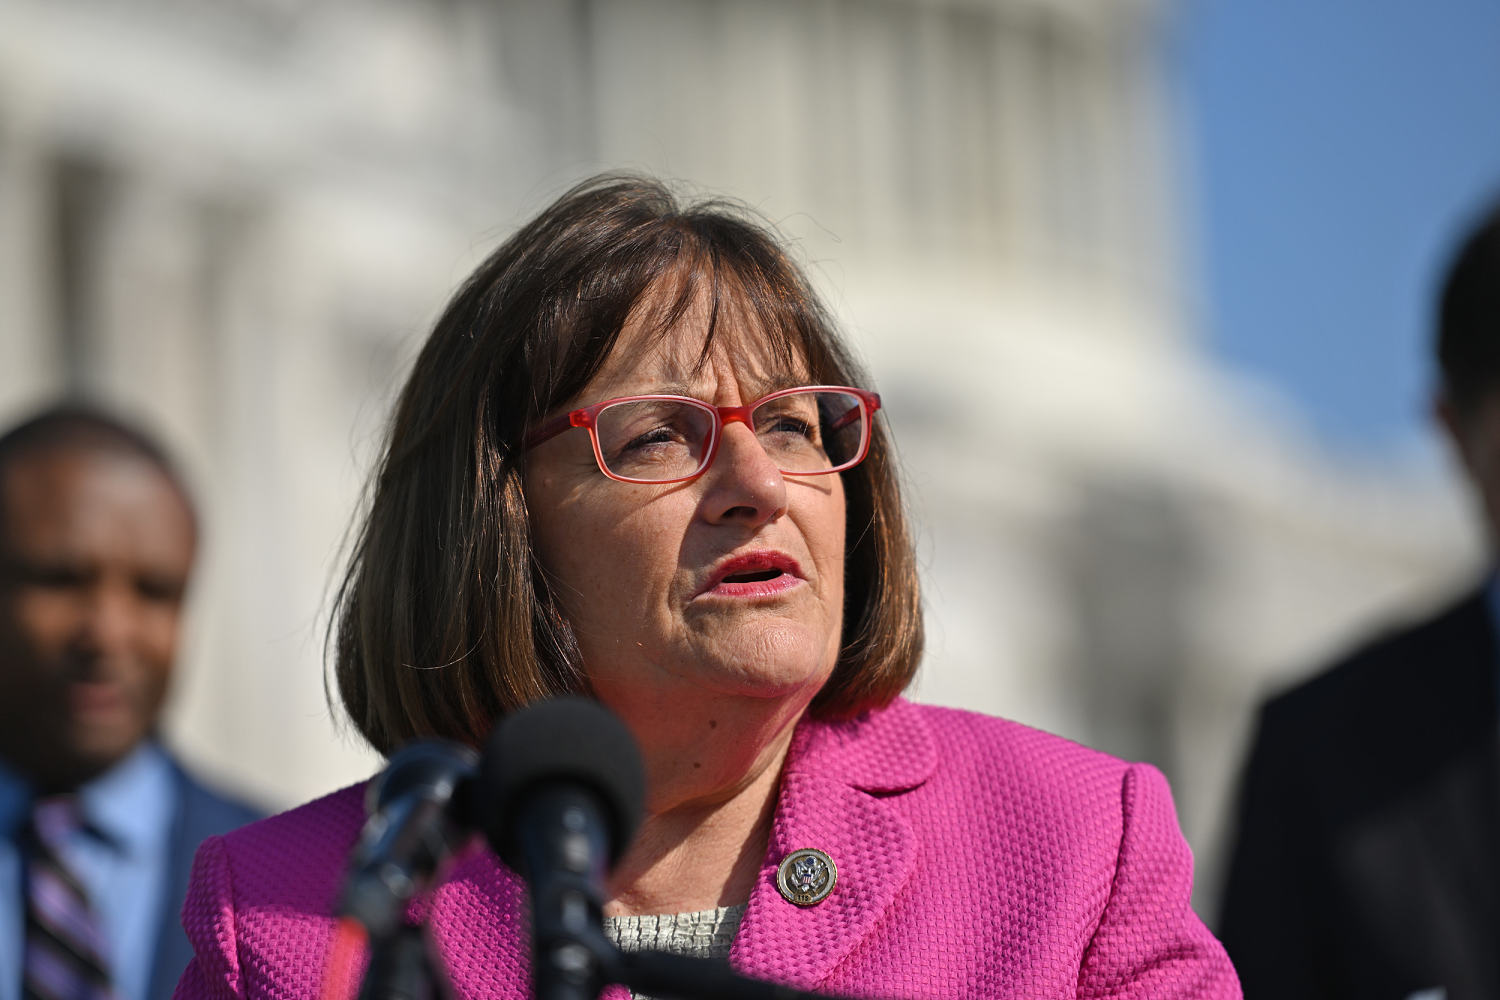 Democratic Rep. Annie Kuster says she won't seek re-election in N.H. swing district